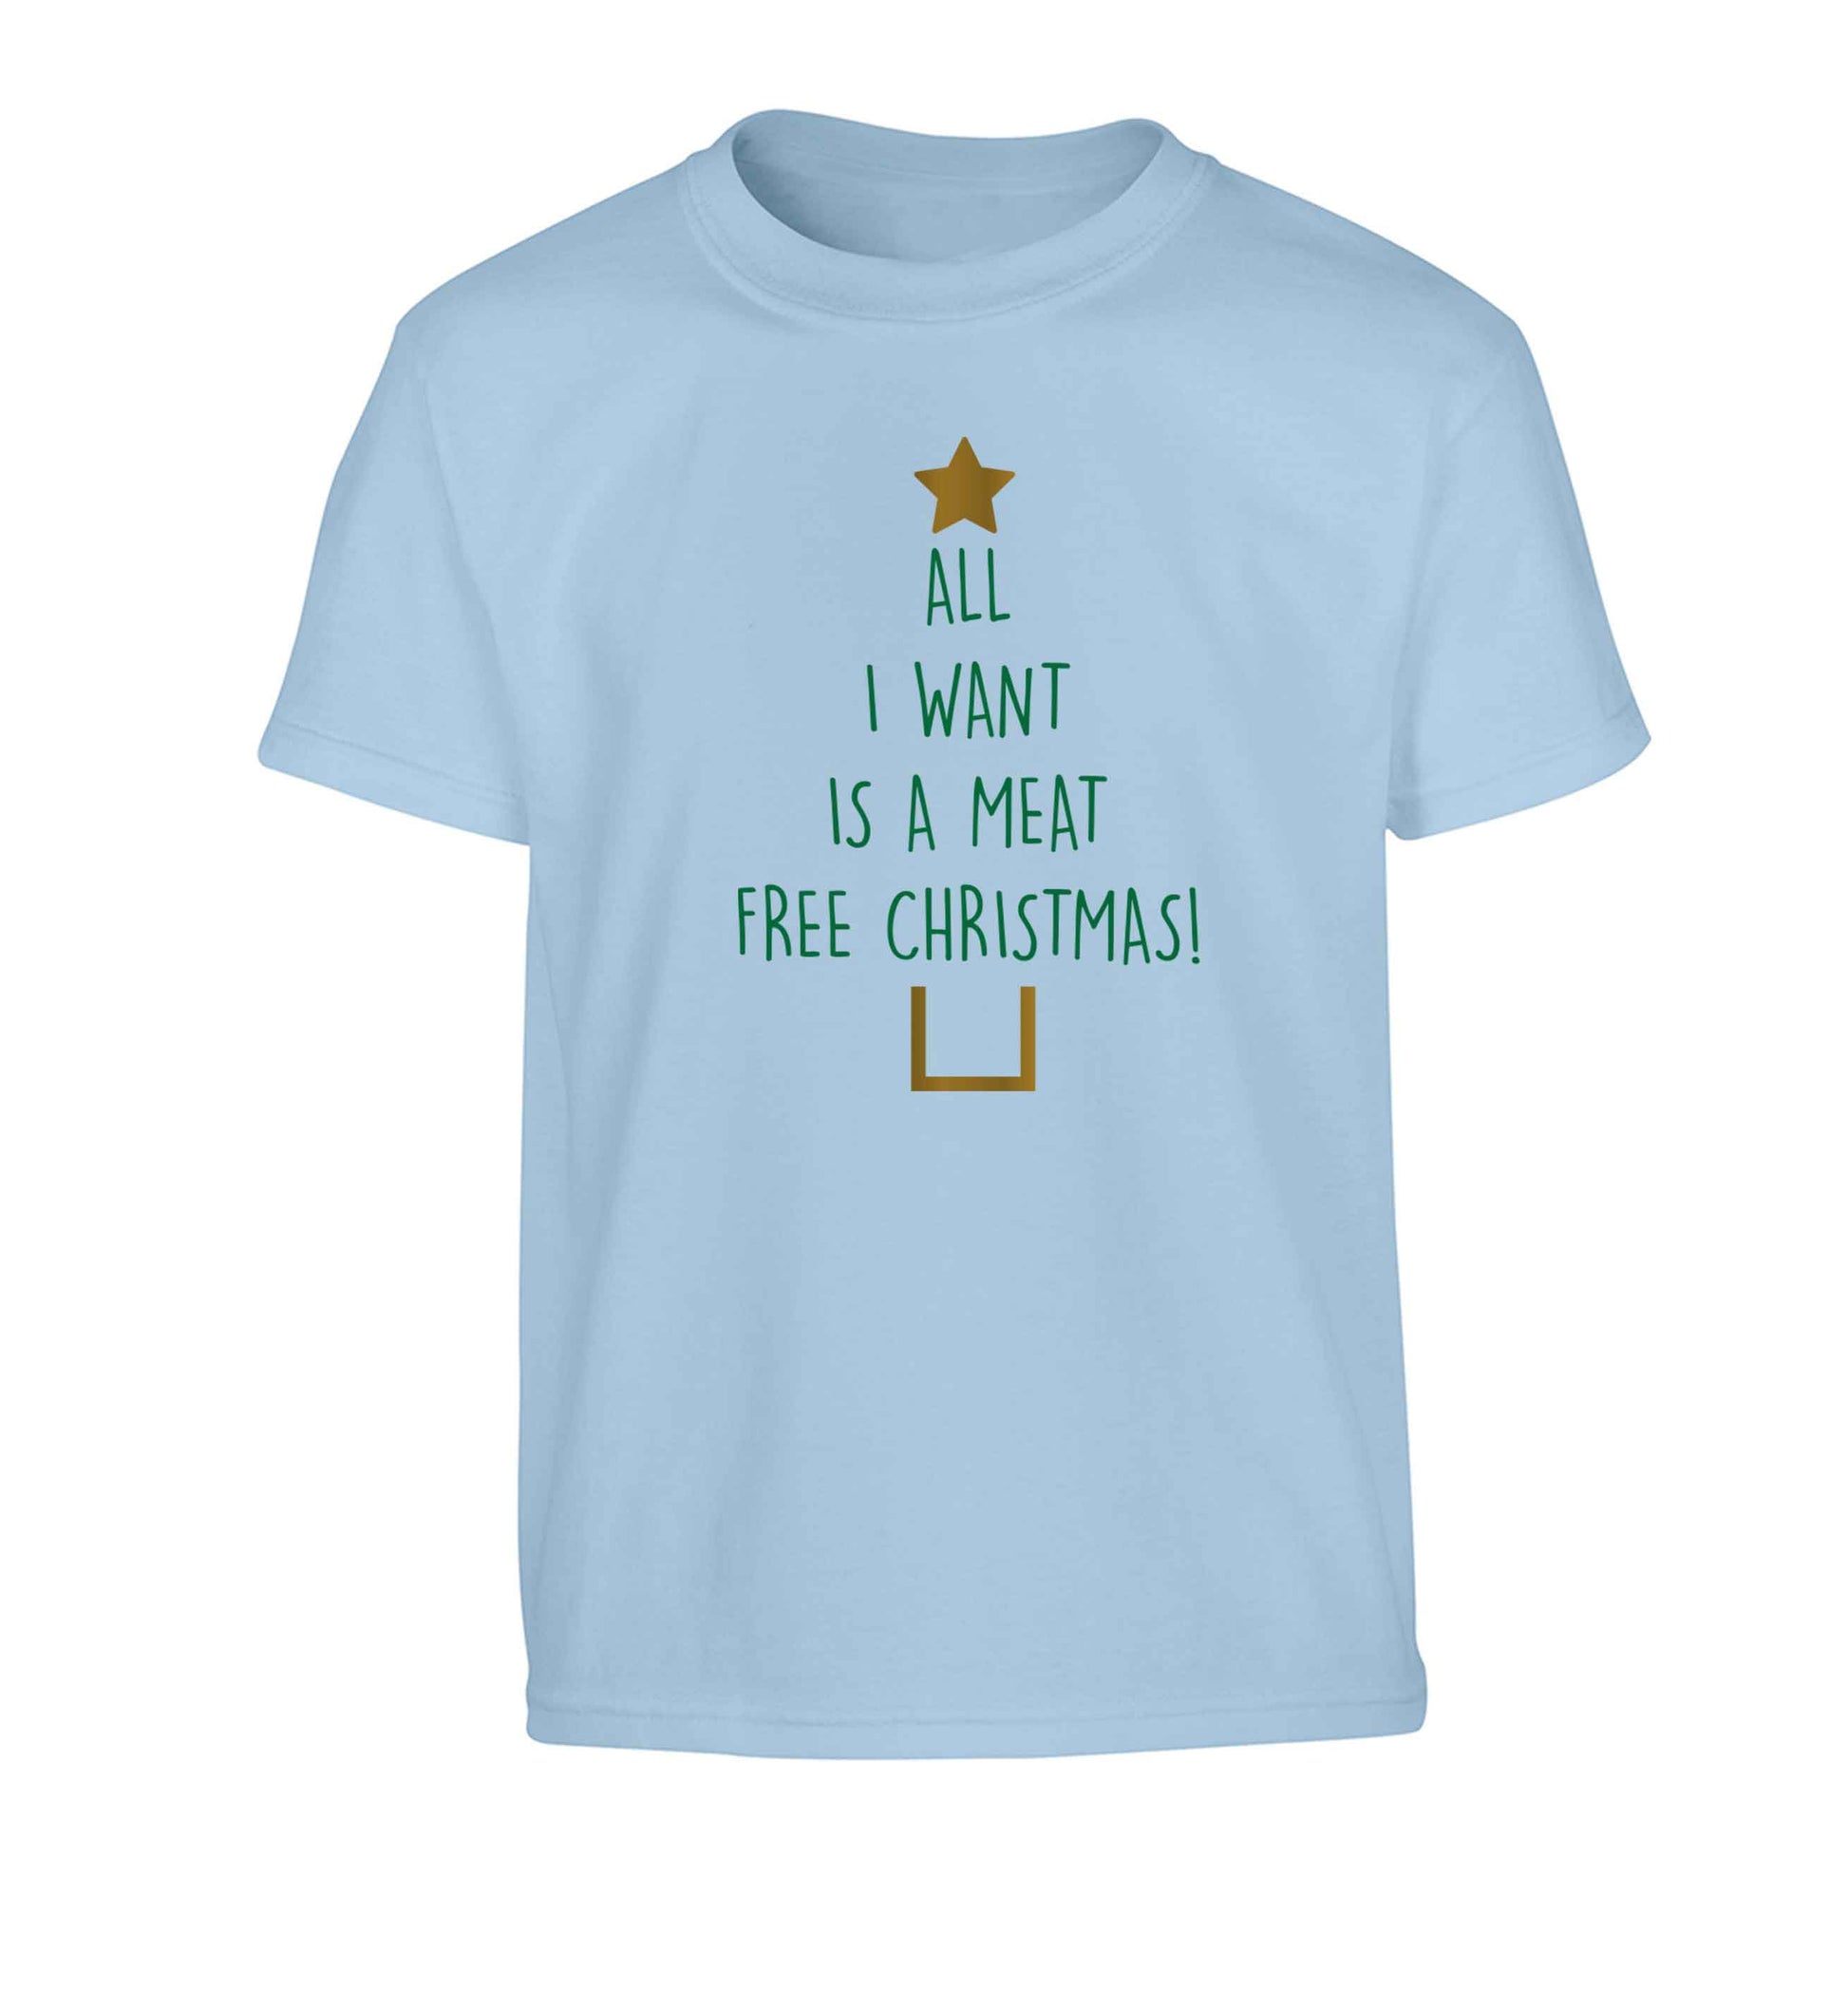 All I want is a meat free Christmas Children's light blue Tshirt 12-13 Years